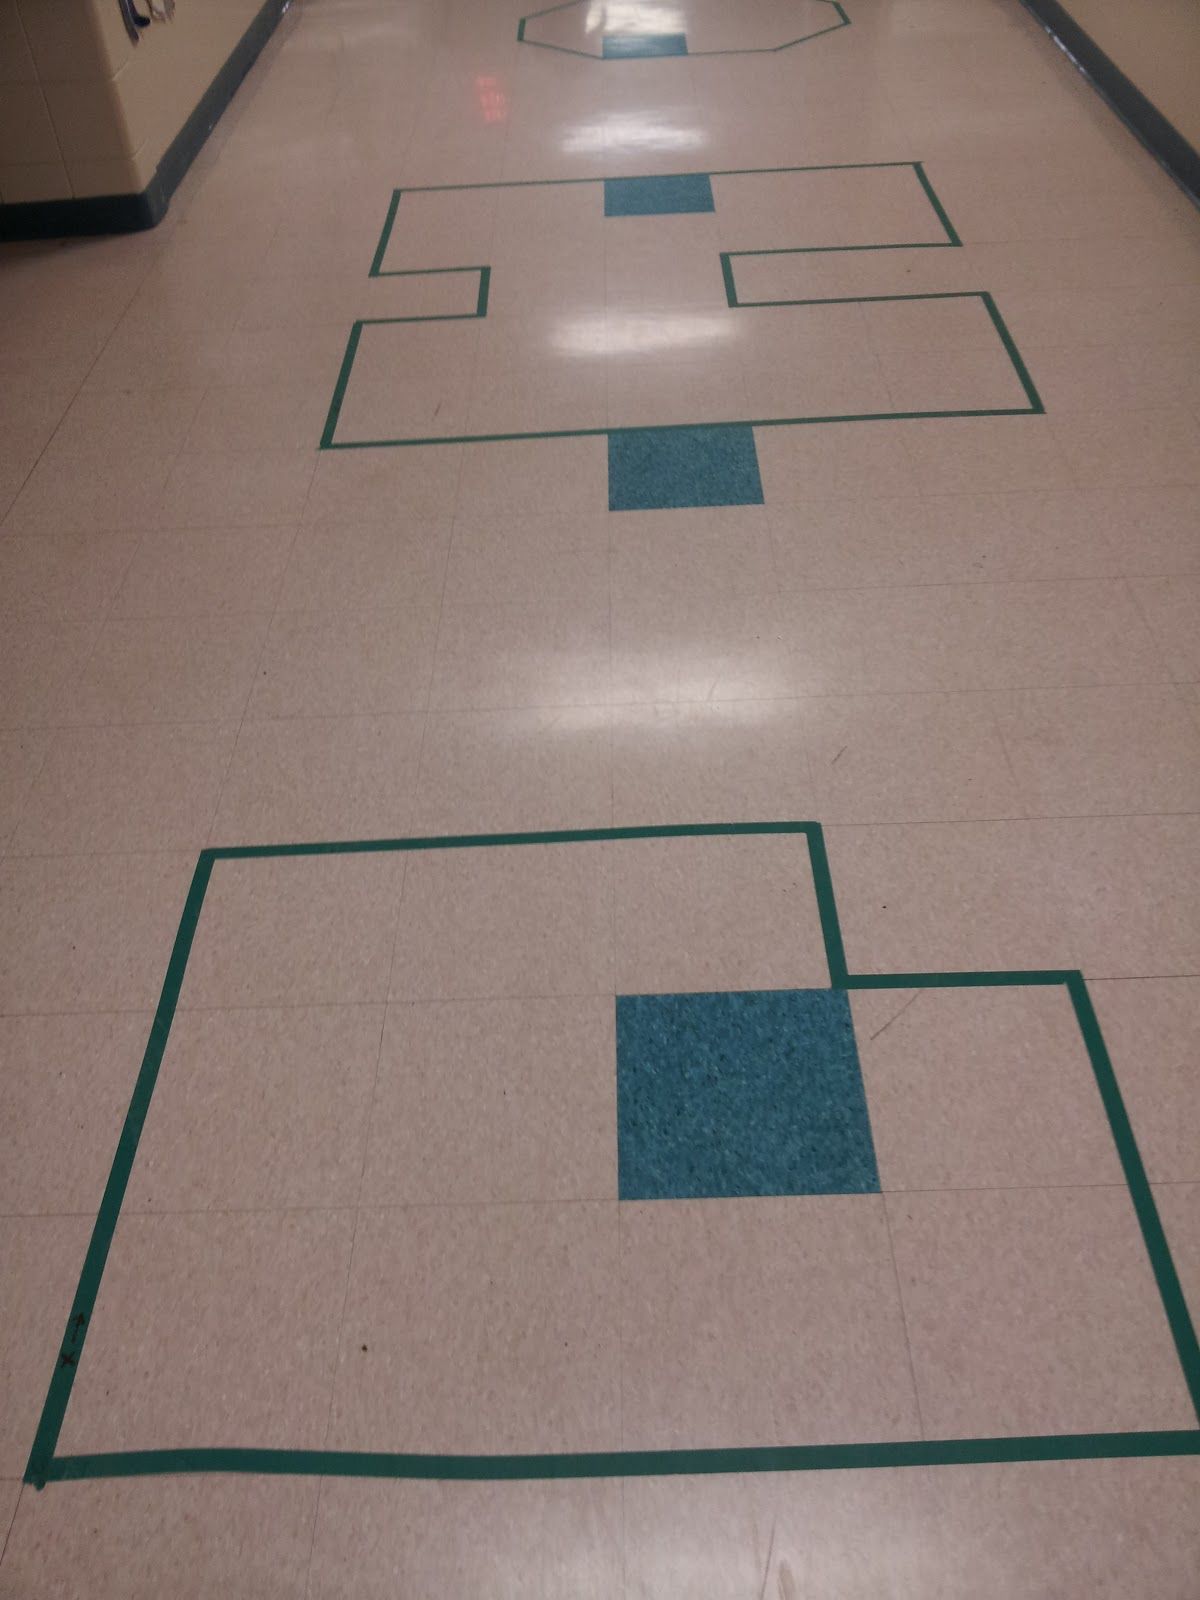 Area and Perimeter with tiles